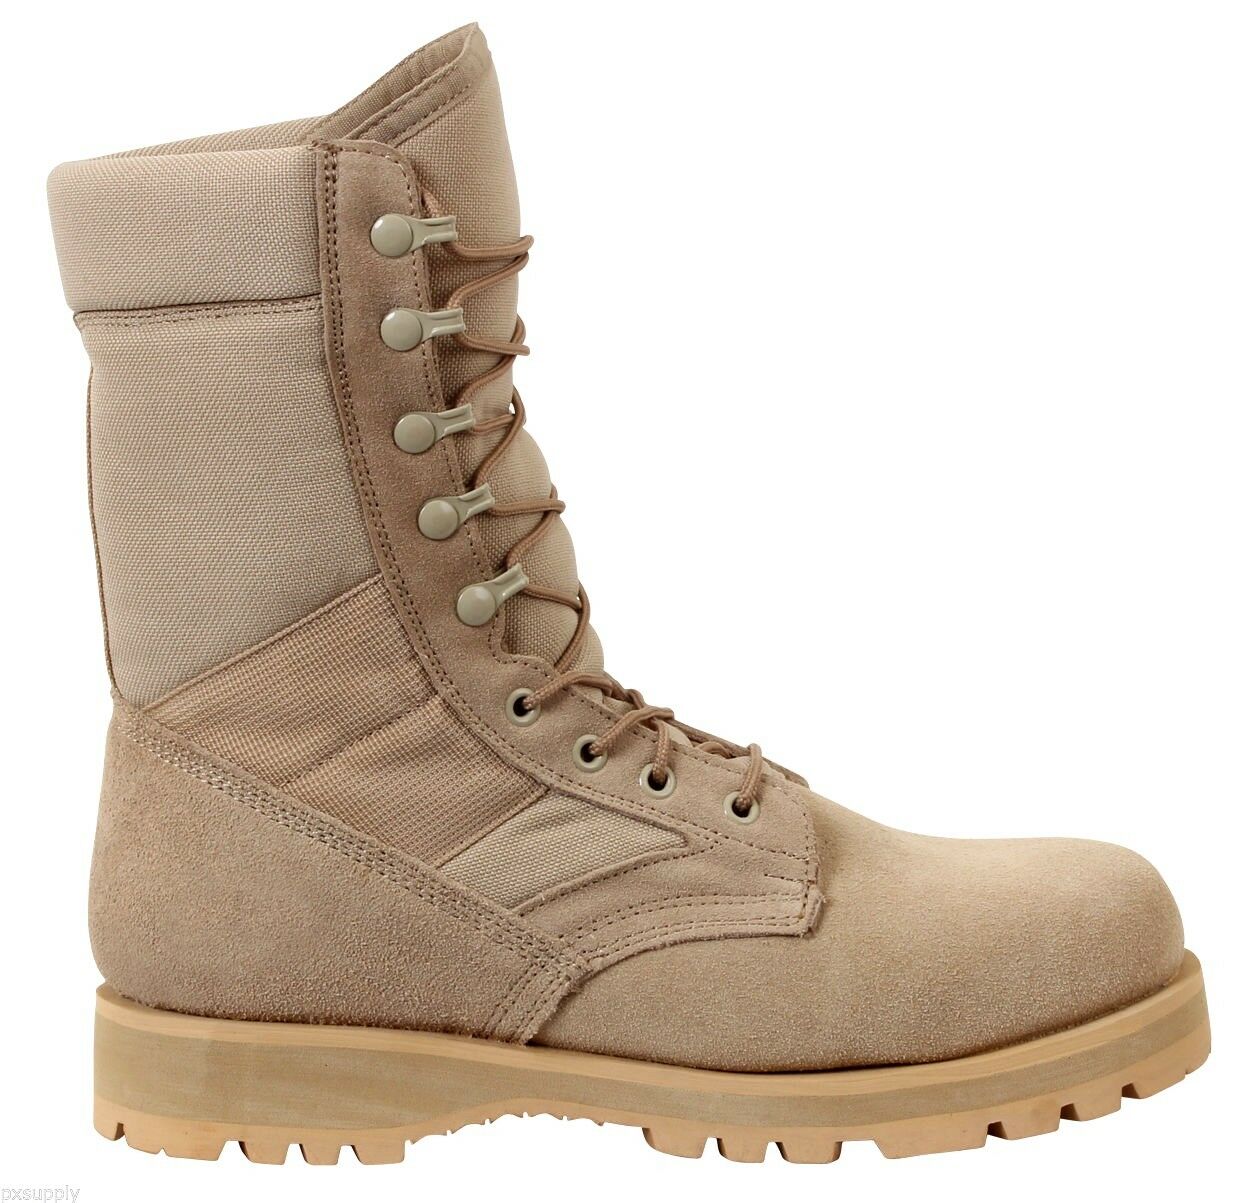 Rothco G.I. Type Sierra Sole Tactical Boots - Desert Sand